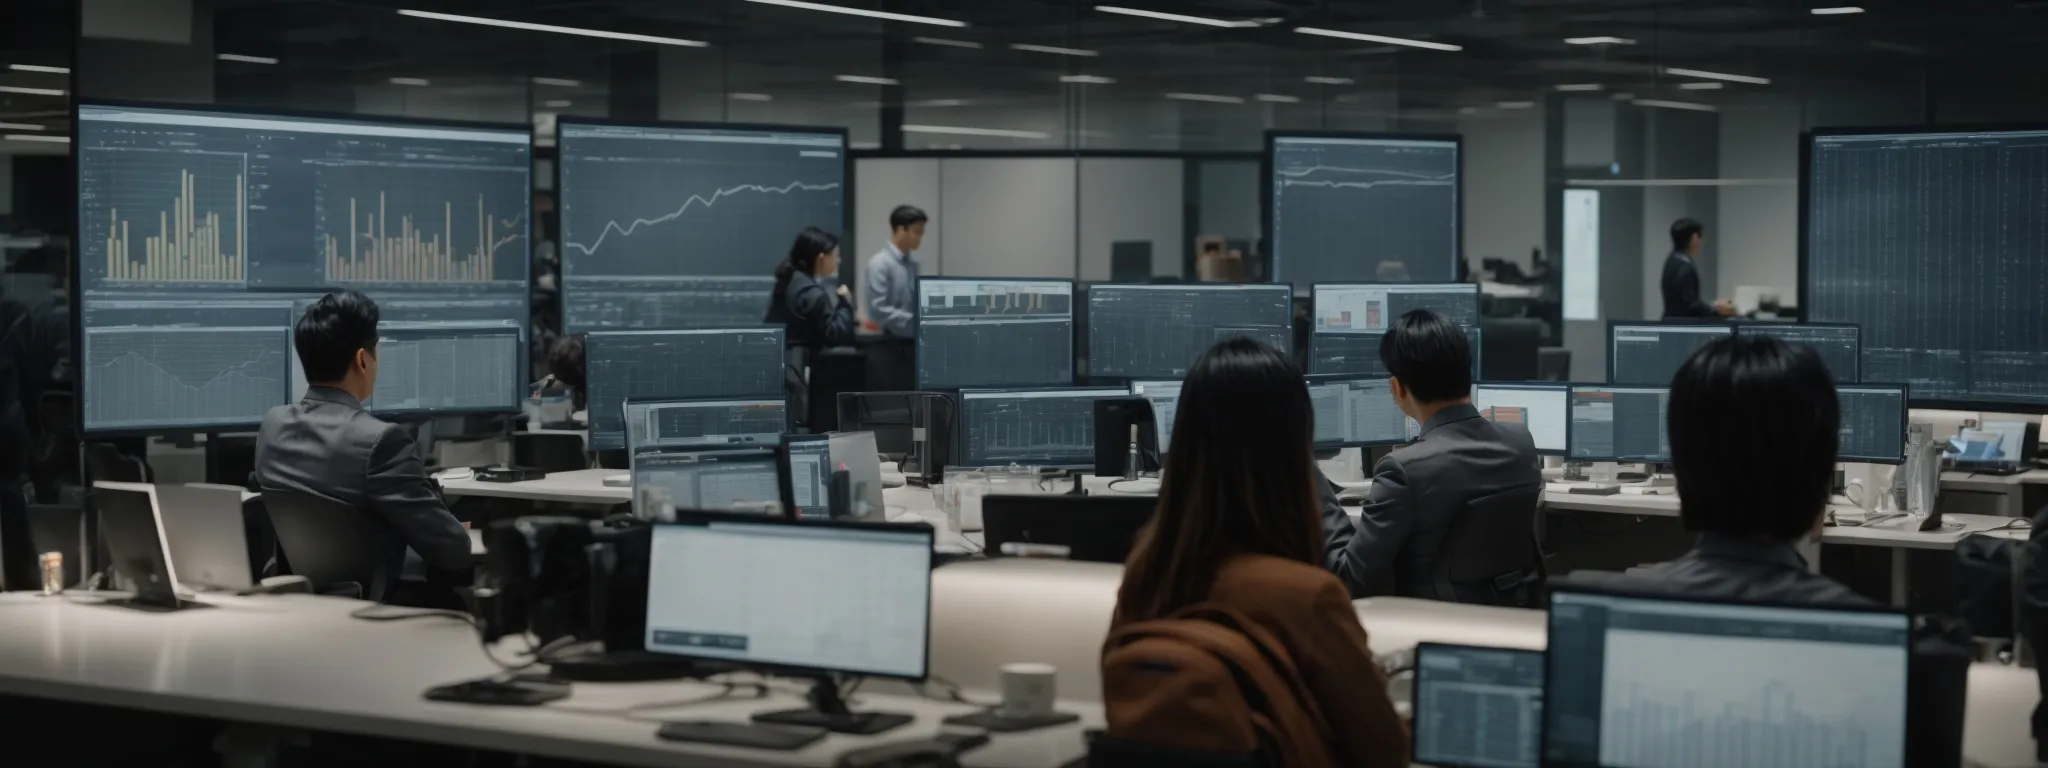 a group of professionals analyzing charts and data on a large screen in a modern office setting.